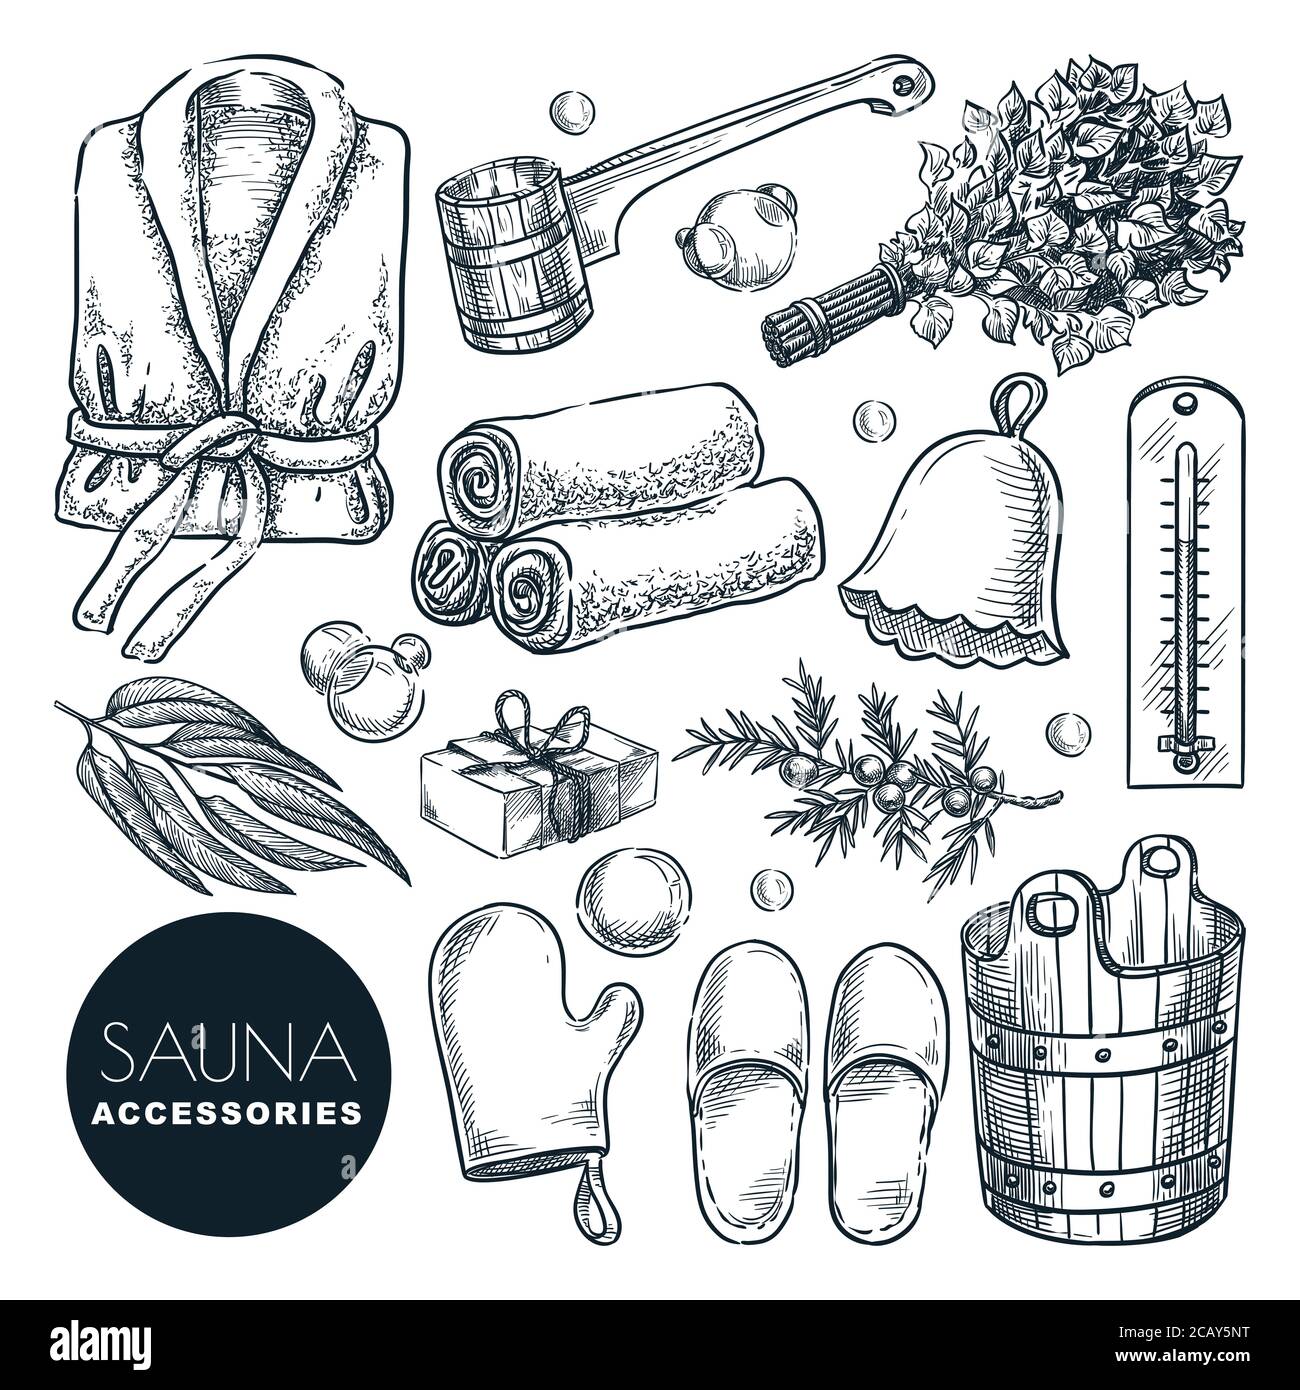 Sauna and bathhouse accessories and equipment set. Vector hand drawn sketch illustration. Bath and spa isolated design elements. Wooden bucket, birch Stock Vector